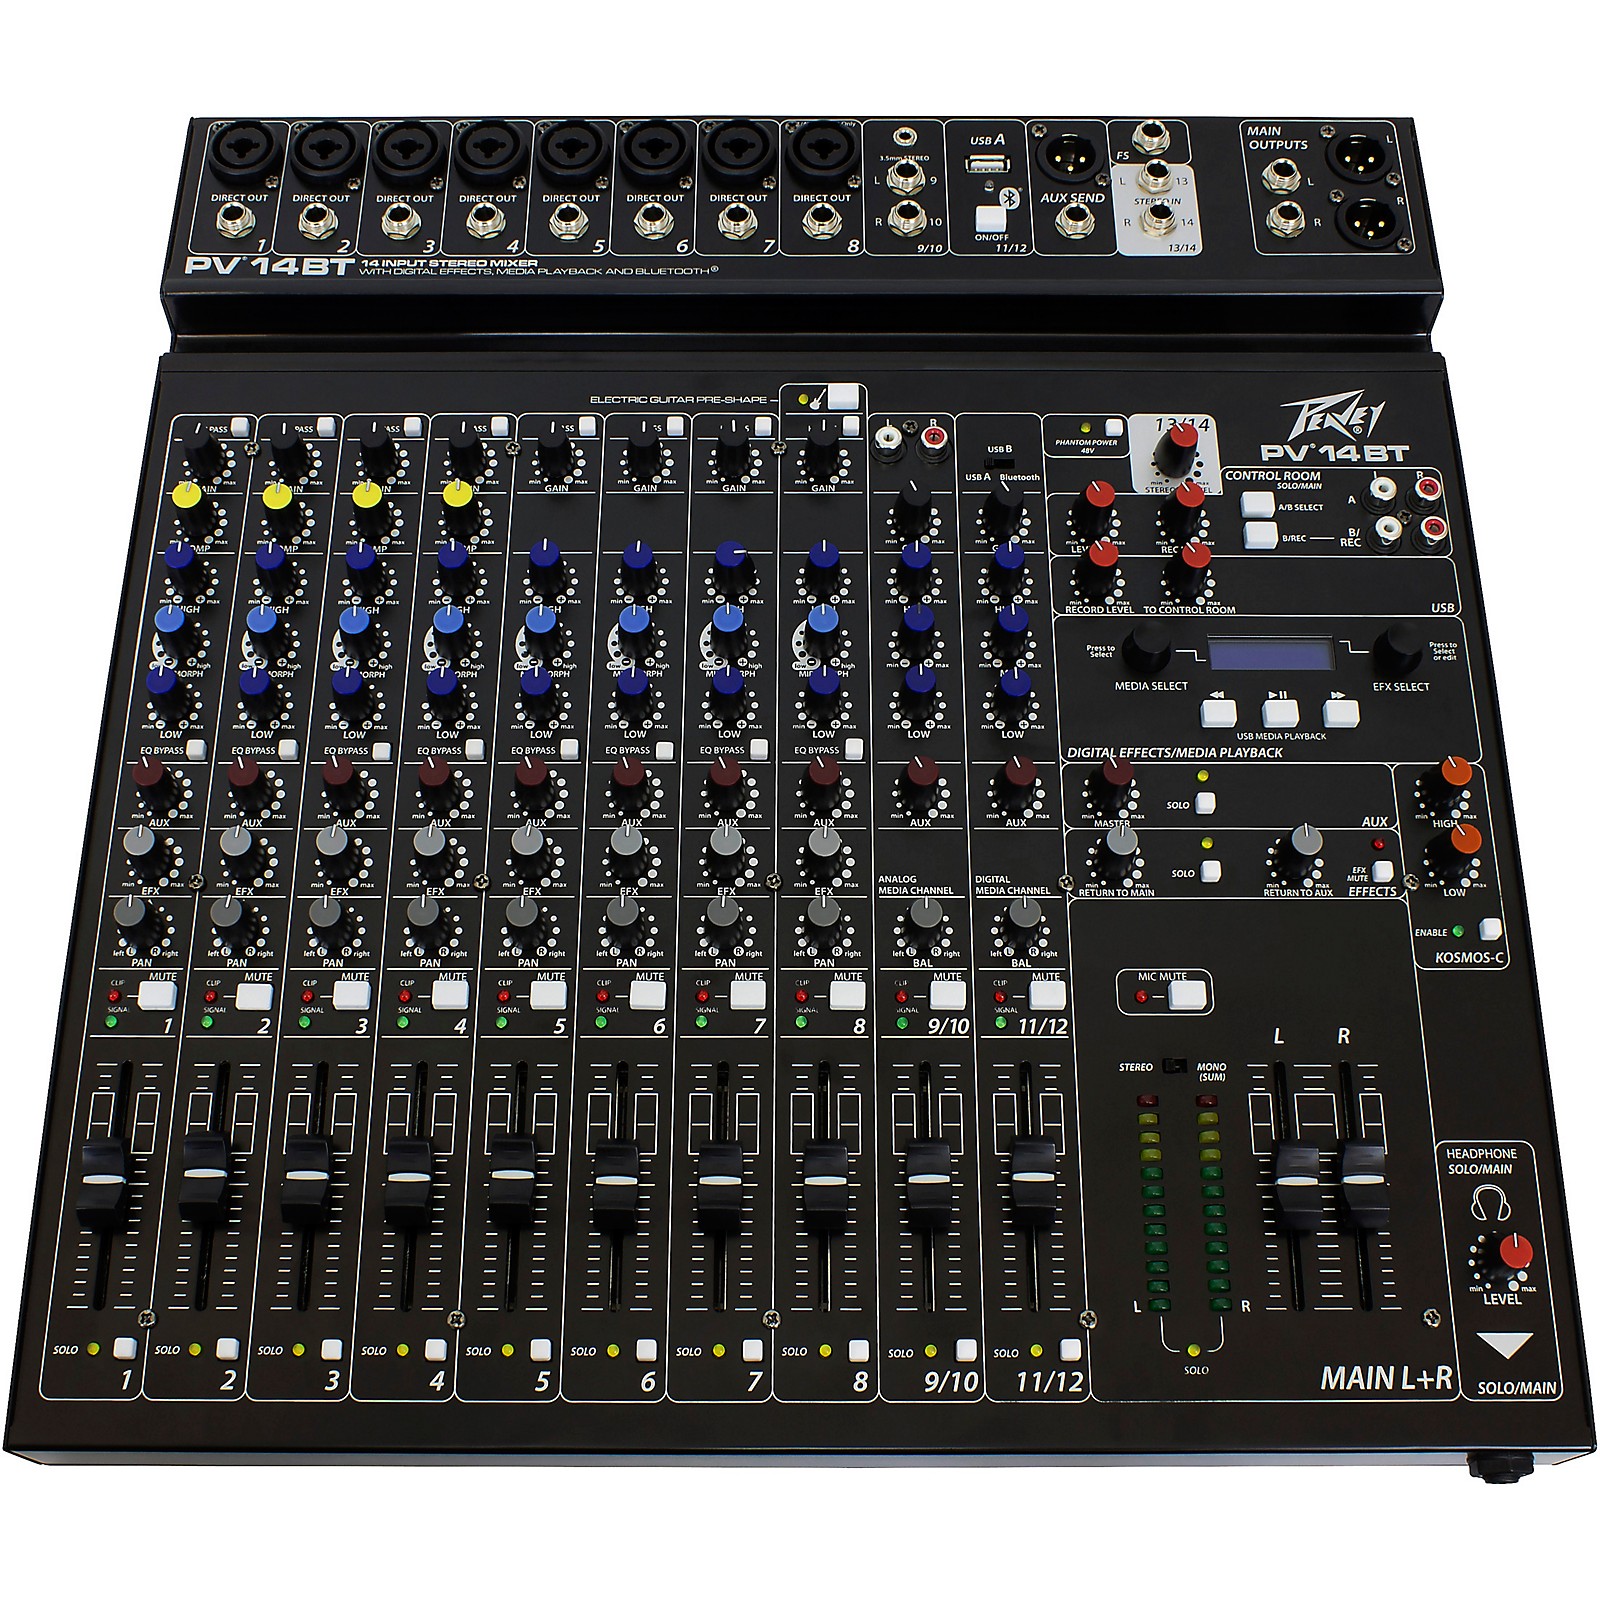 Peavey PV 14 BT Mixer with Bluetooth | Musician's Friend